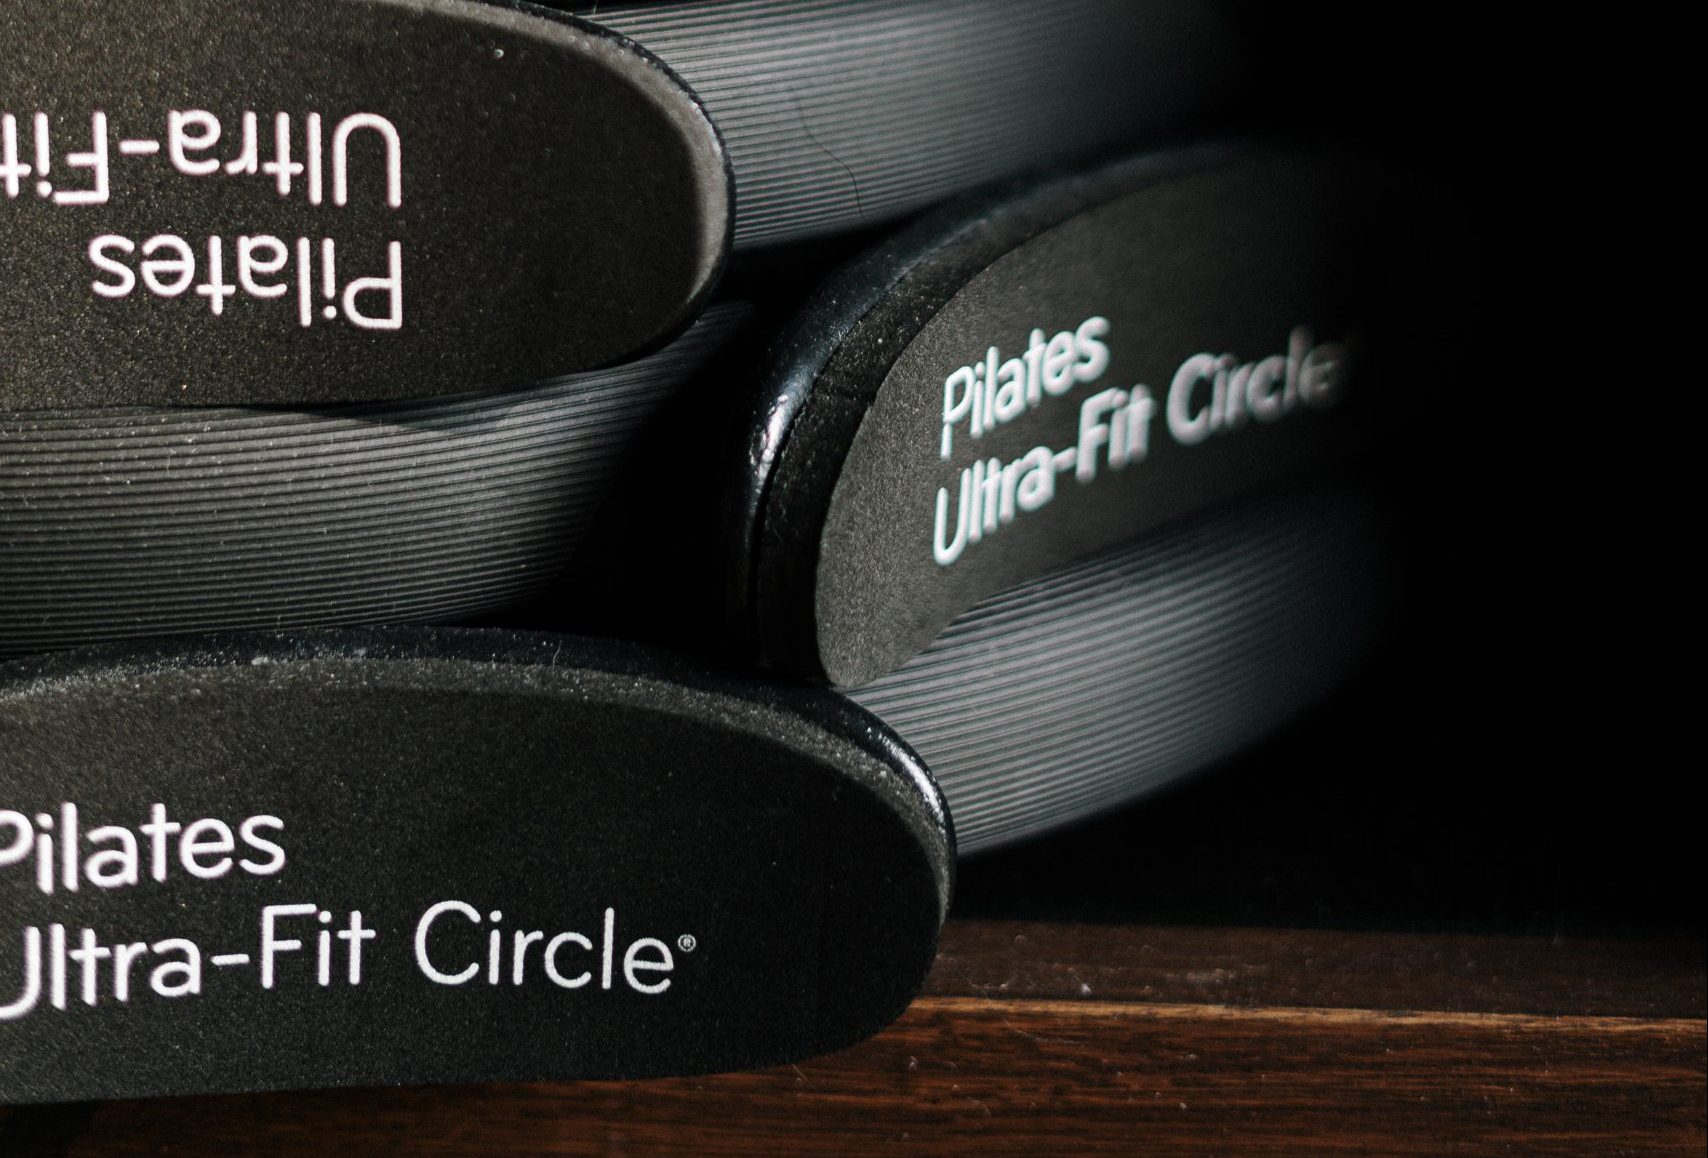 Buy Pilates Ring from Physique